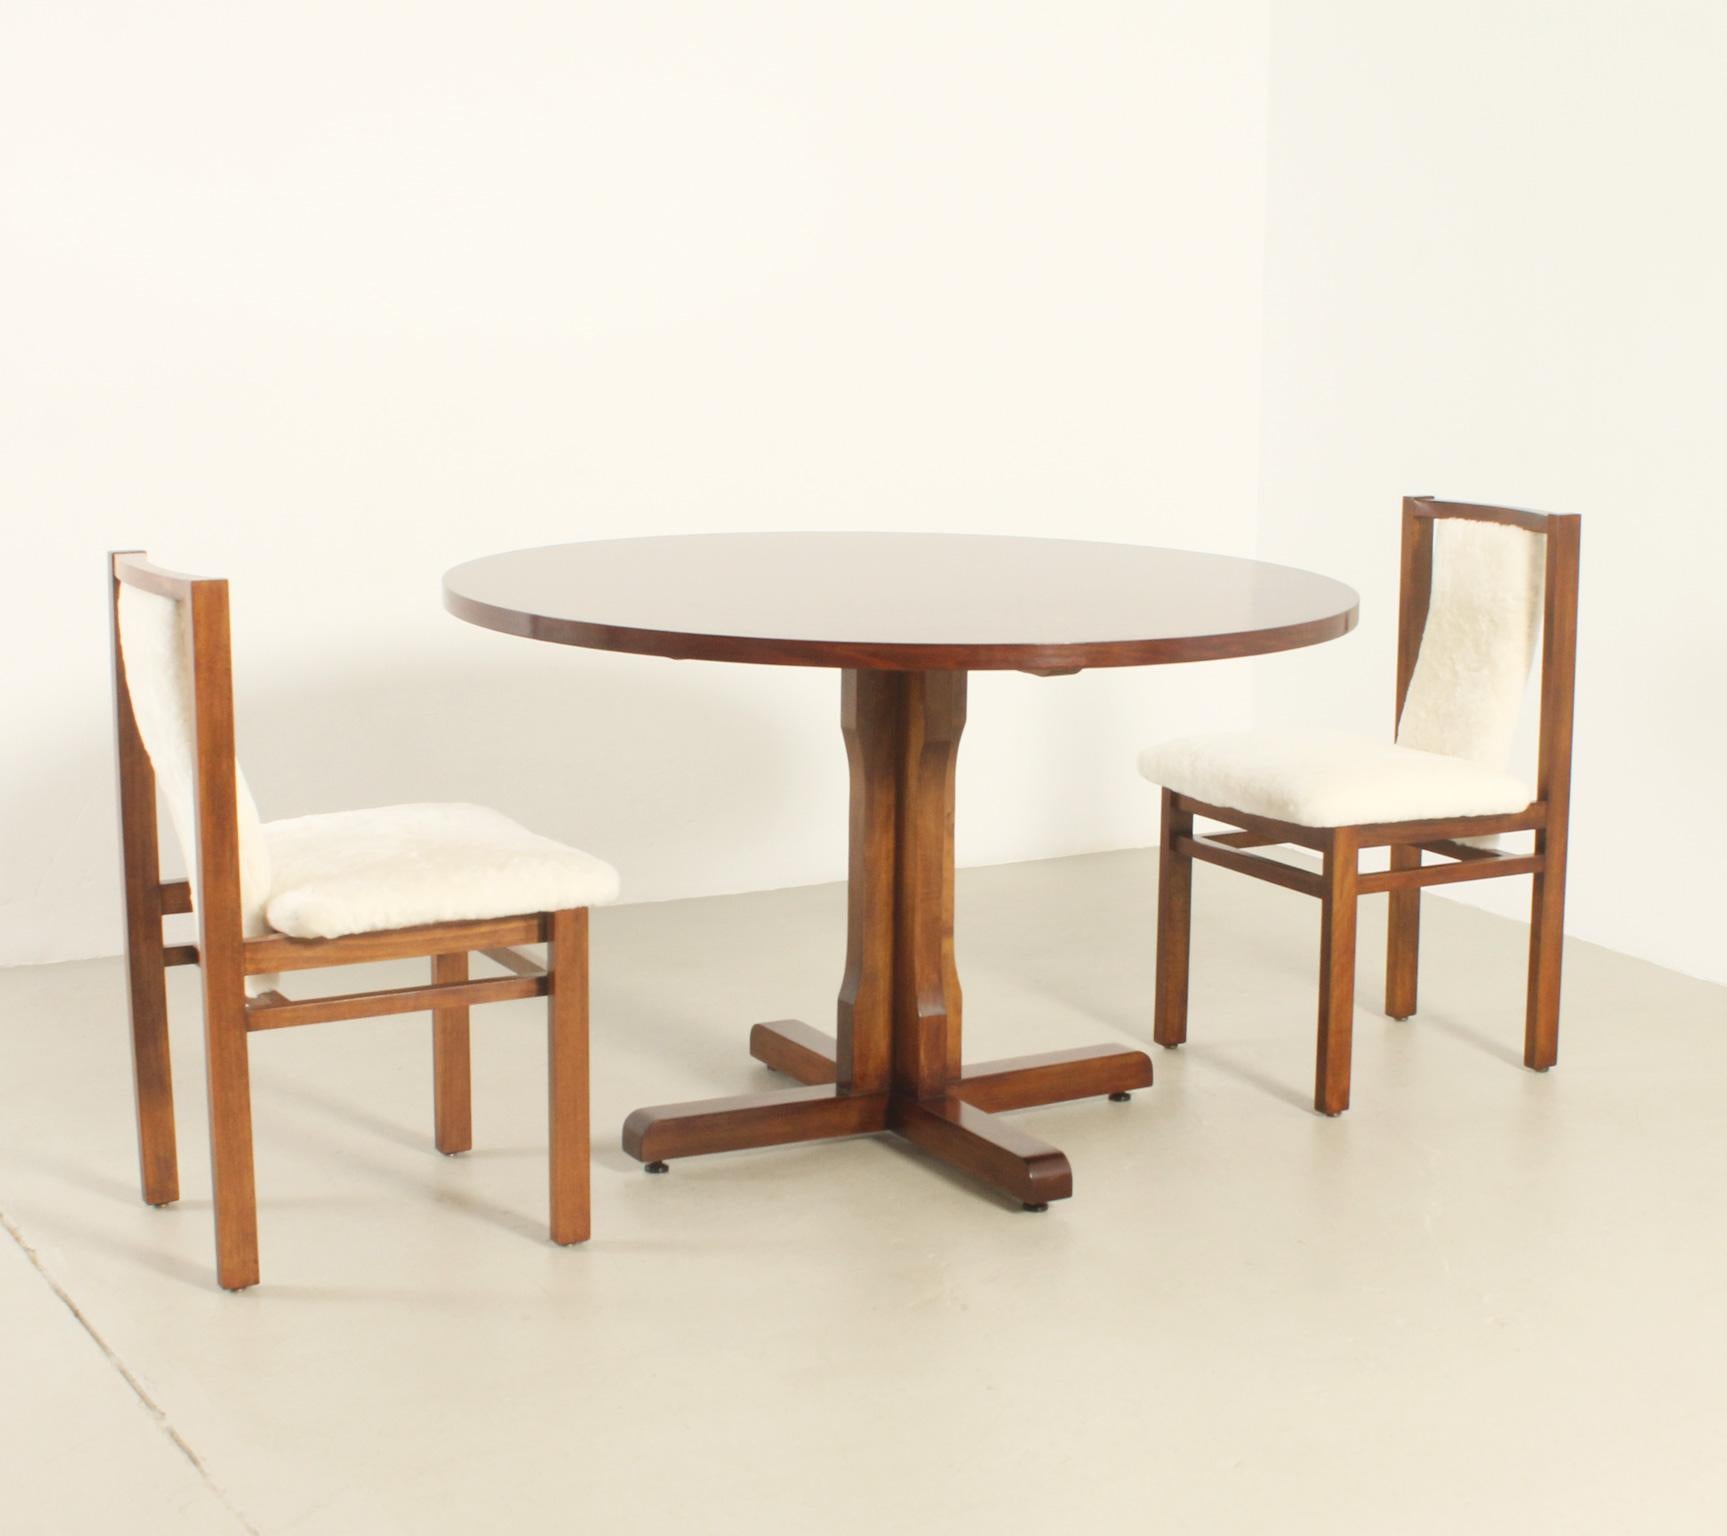 Round Dining Table in Walnut Wood by Jordi Vilanova, Spain, 1960's For Sale 6